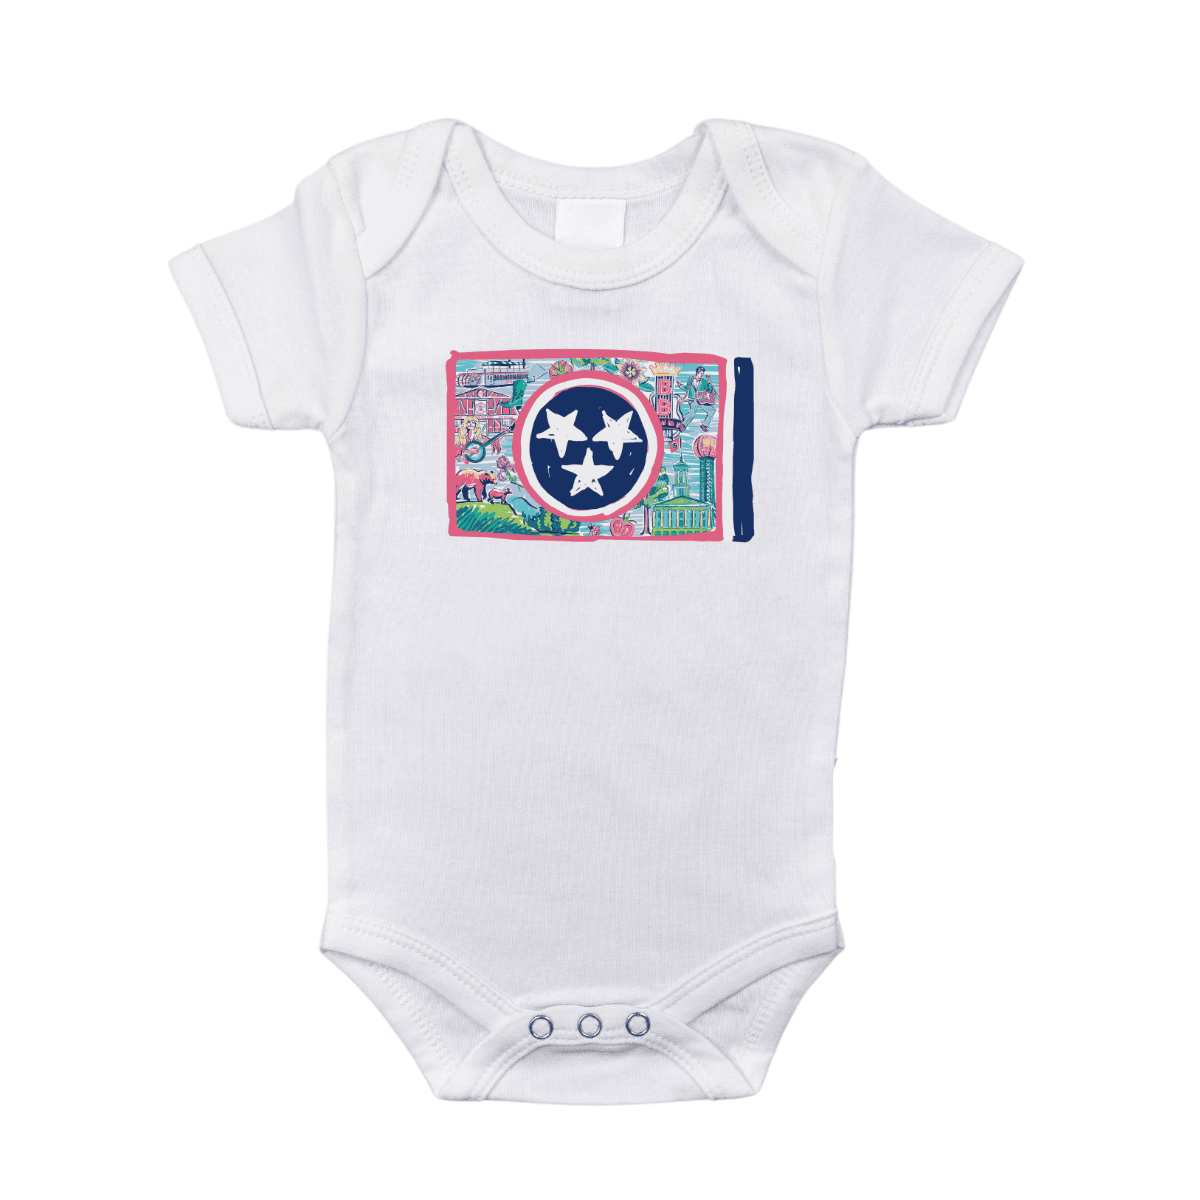 Red baby onesie with "Tennessee" and state flag design, featuring three white stars in a blue circle.